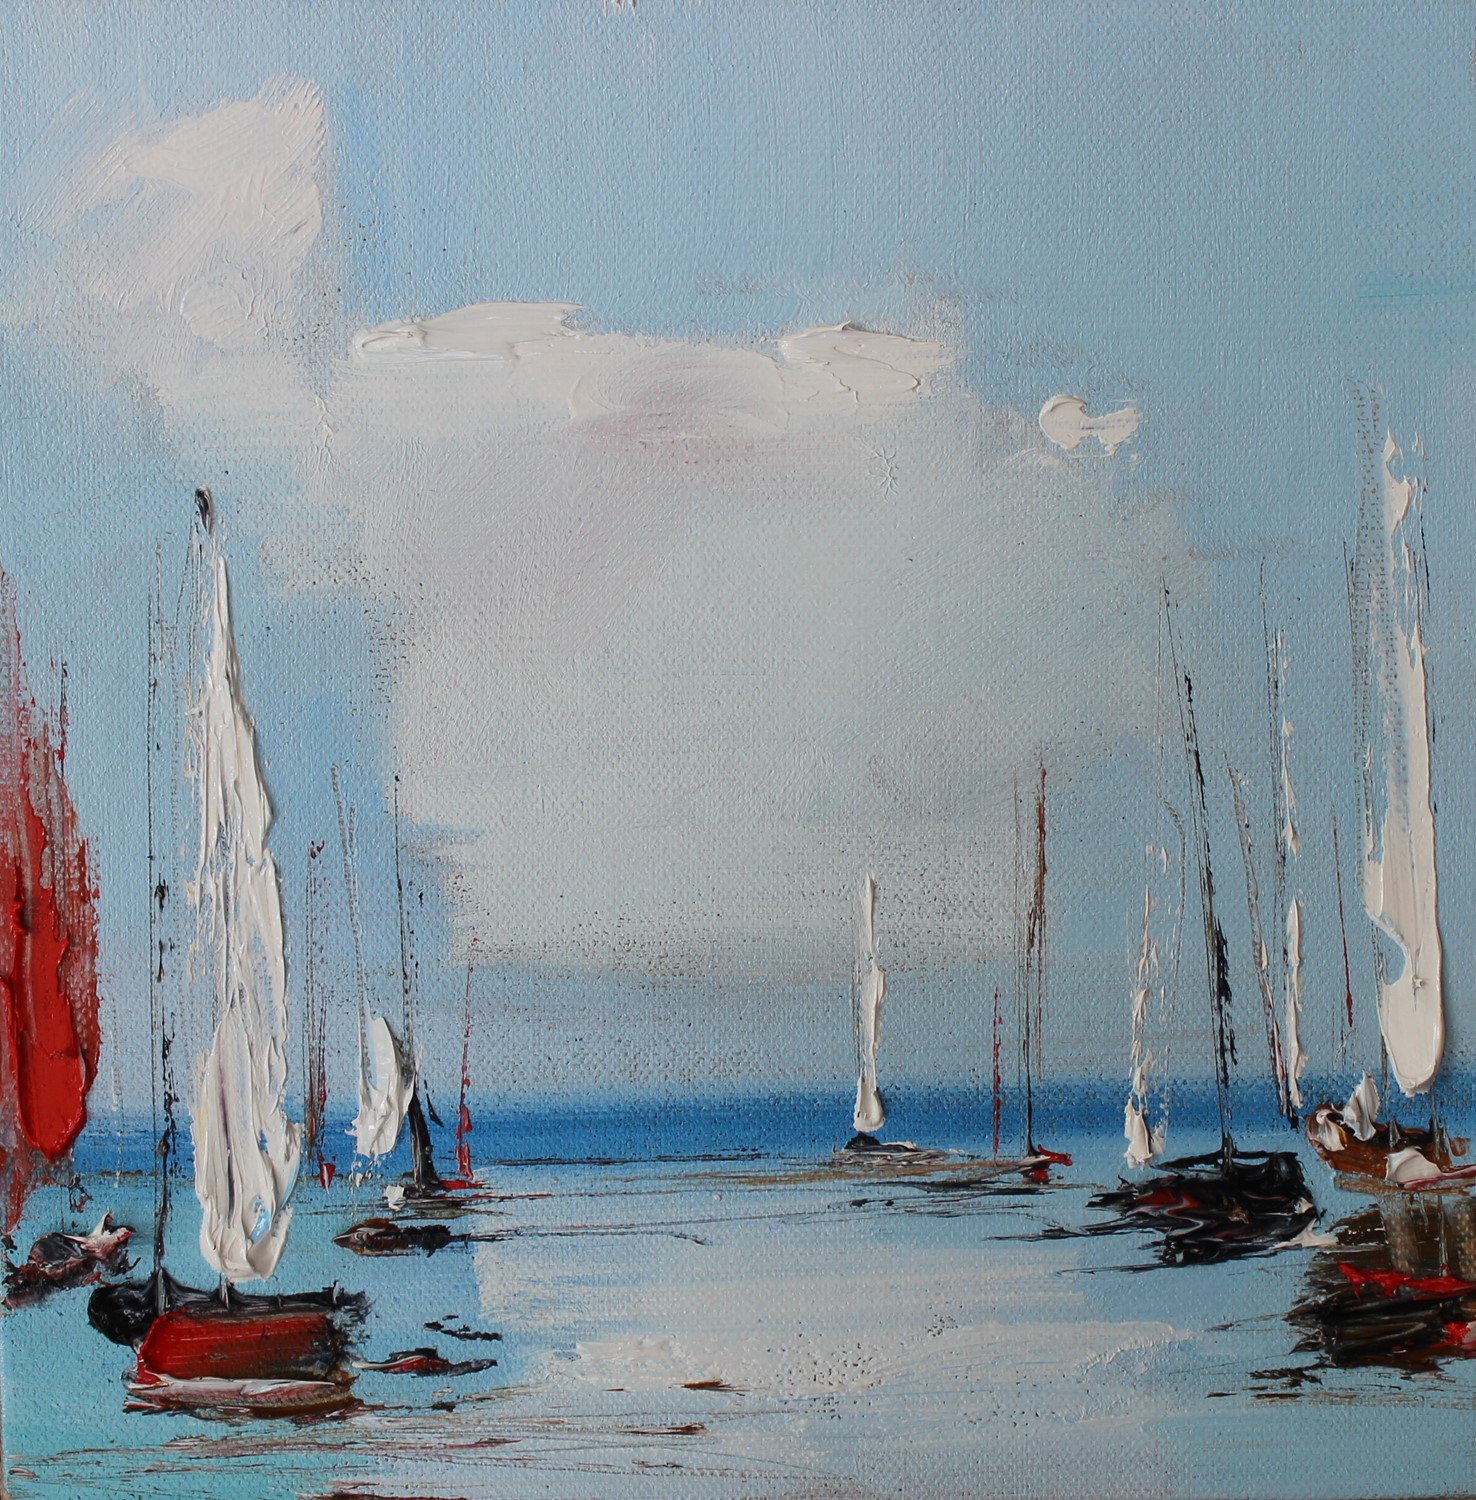 'Clouds and Boats' by artist Rosanne Barr